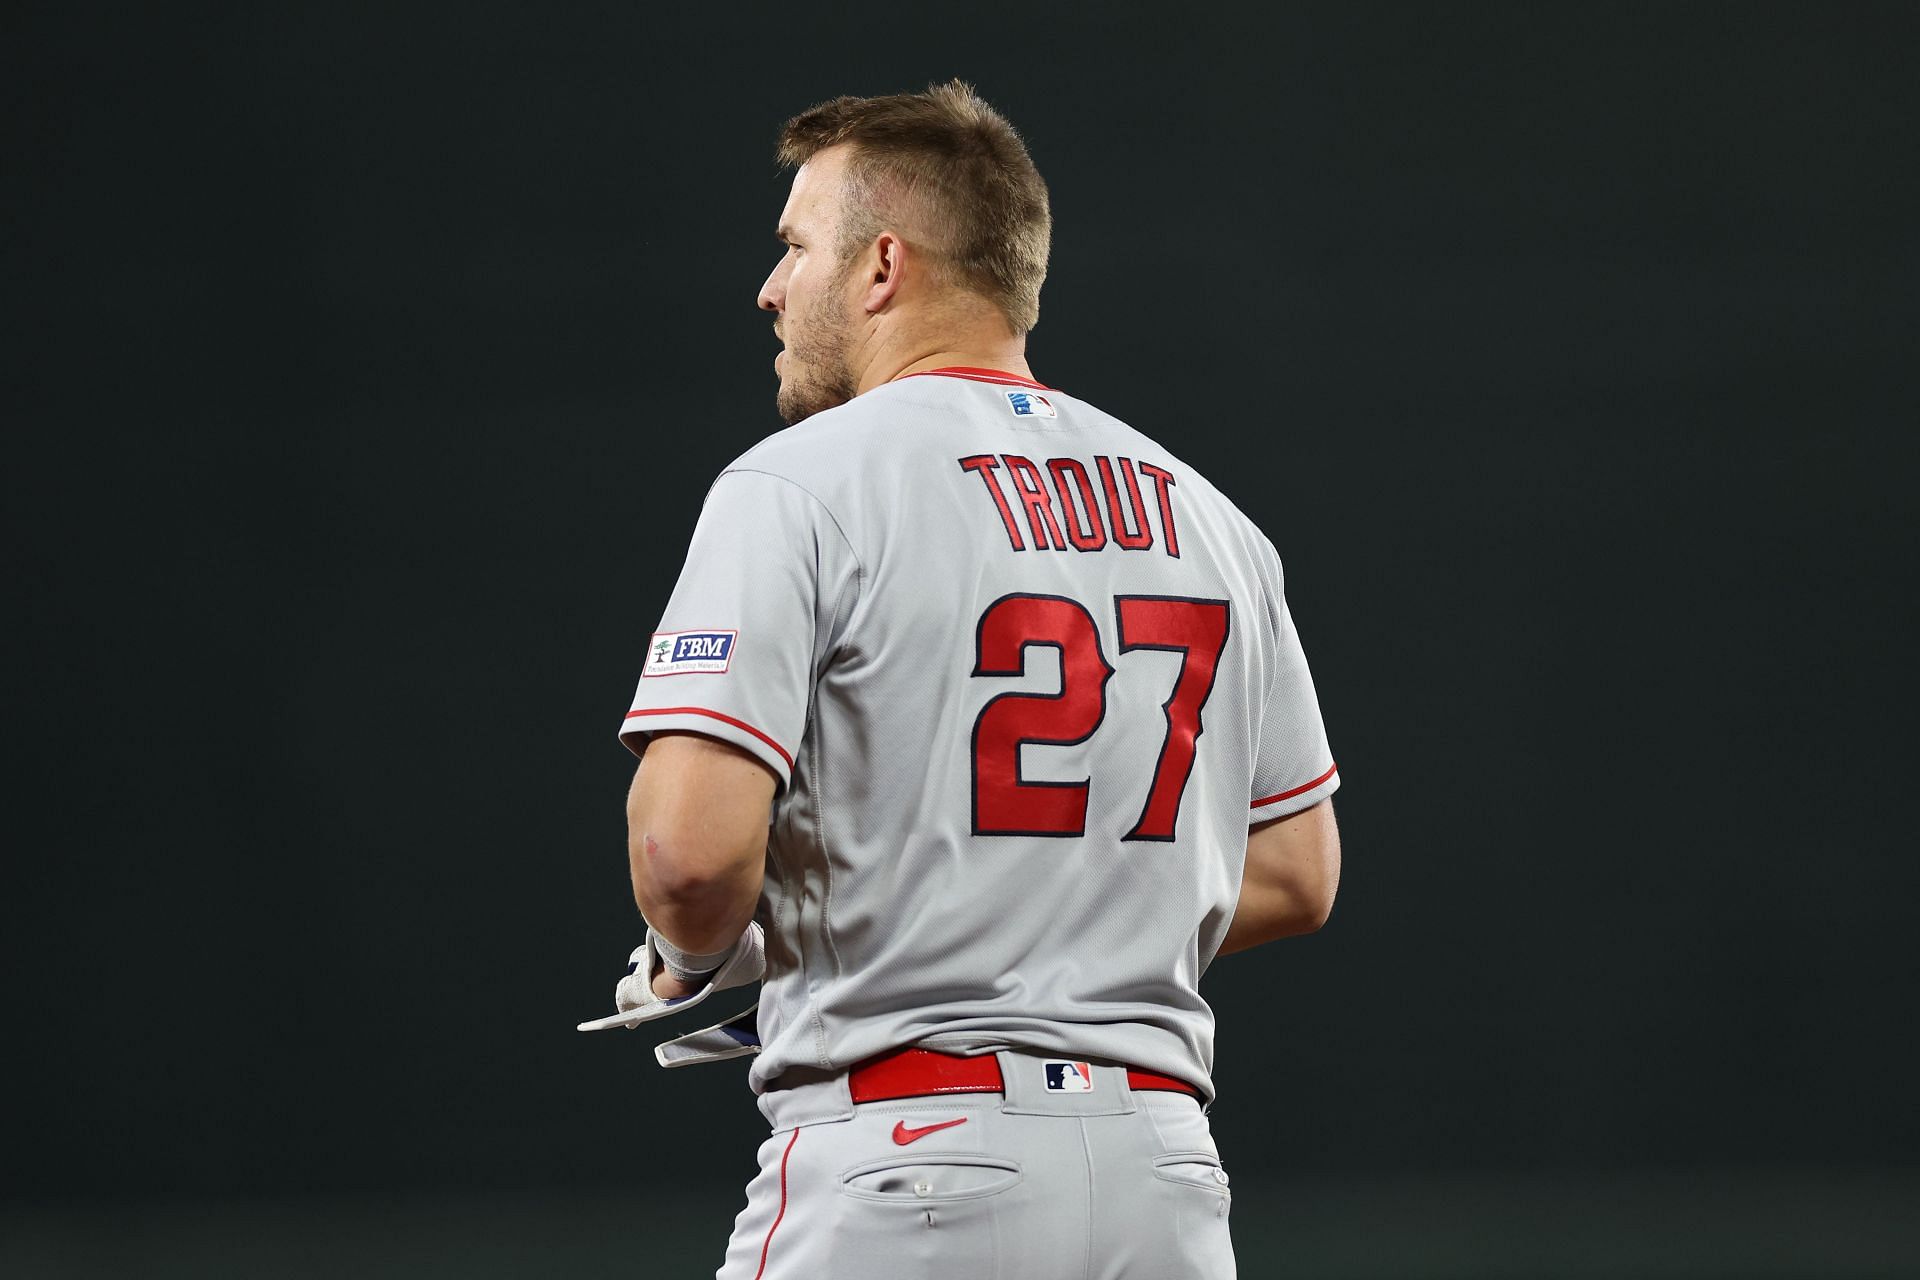 Angels outfielder Mike Trout reaches historic milestone to tie